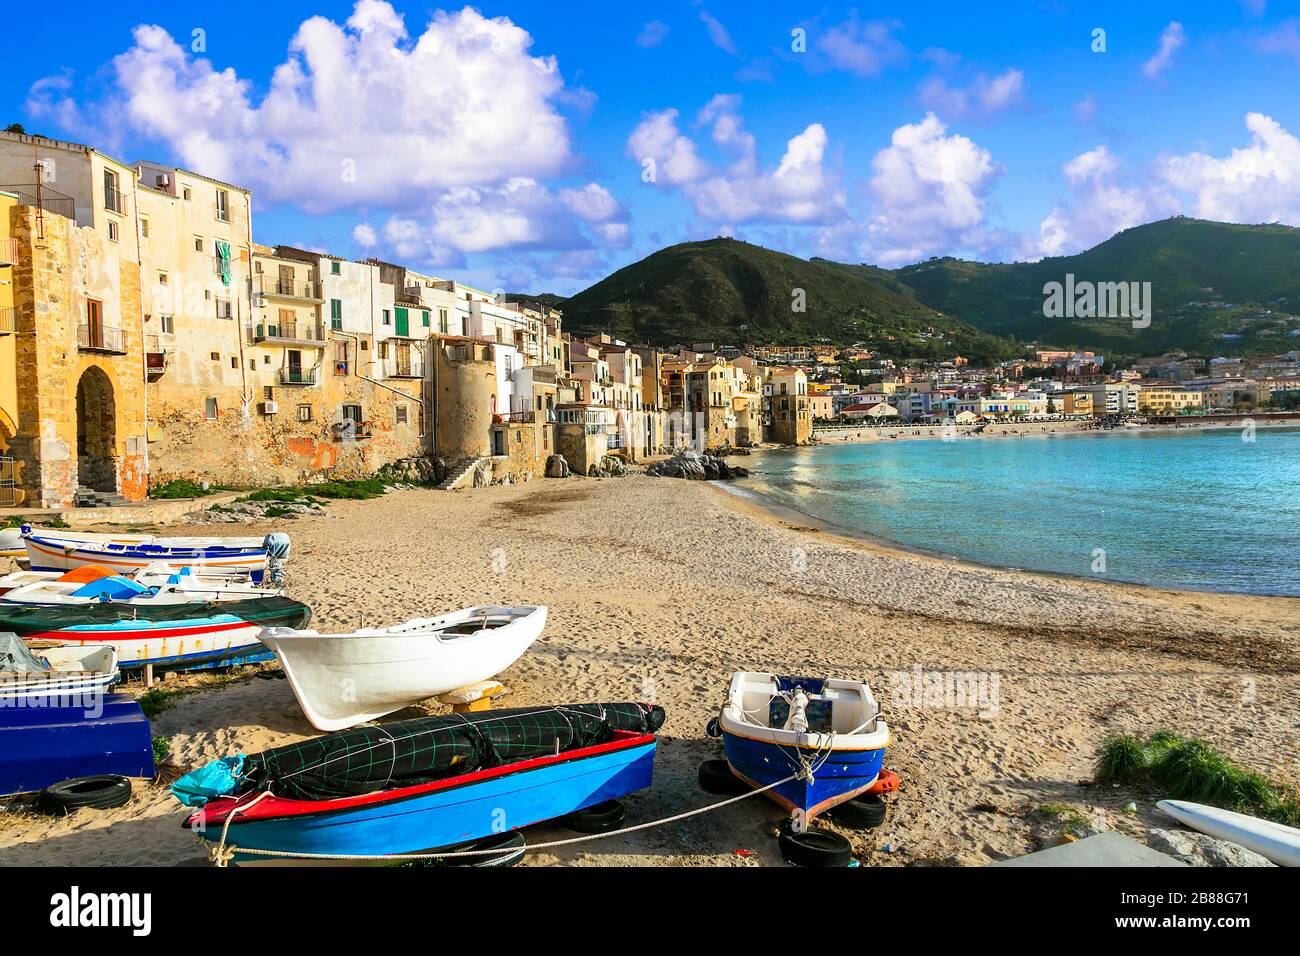 Traditional Cefalu’ famous illage,view with colorful houses,sea and mountains,Sicily,Italy. Stock Photo